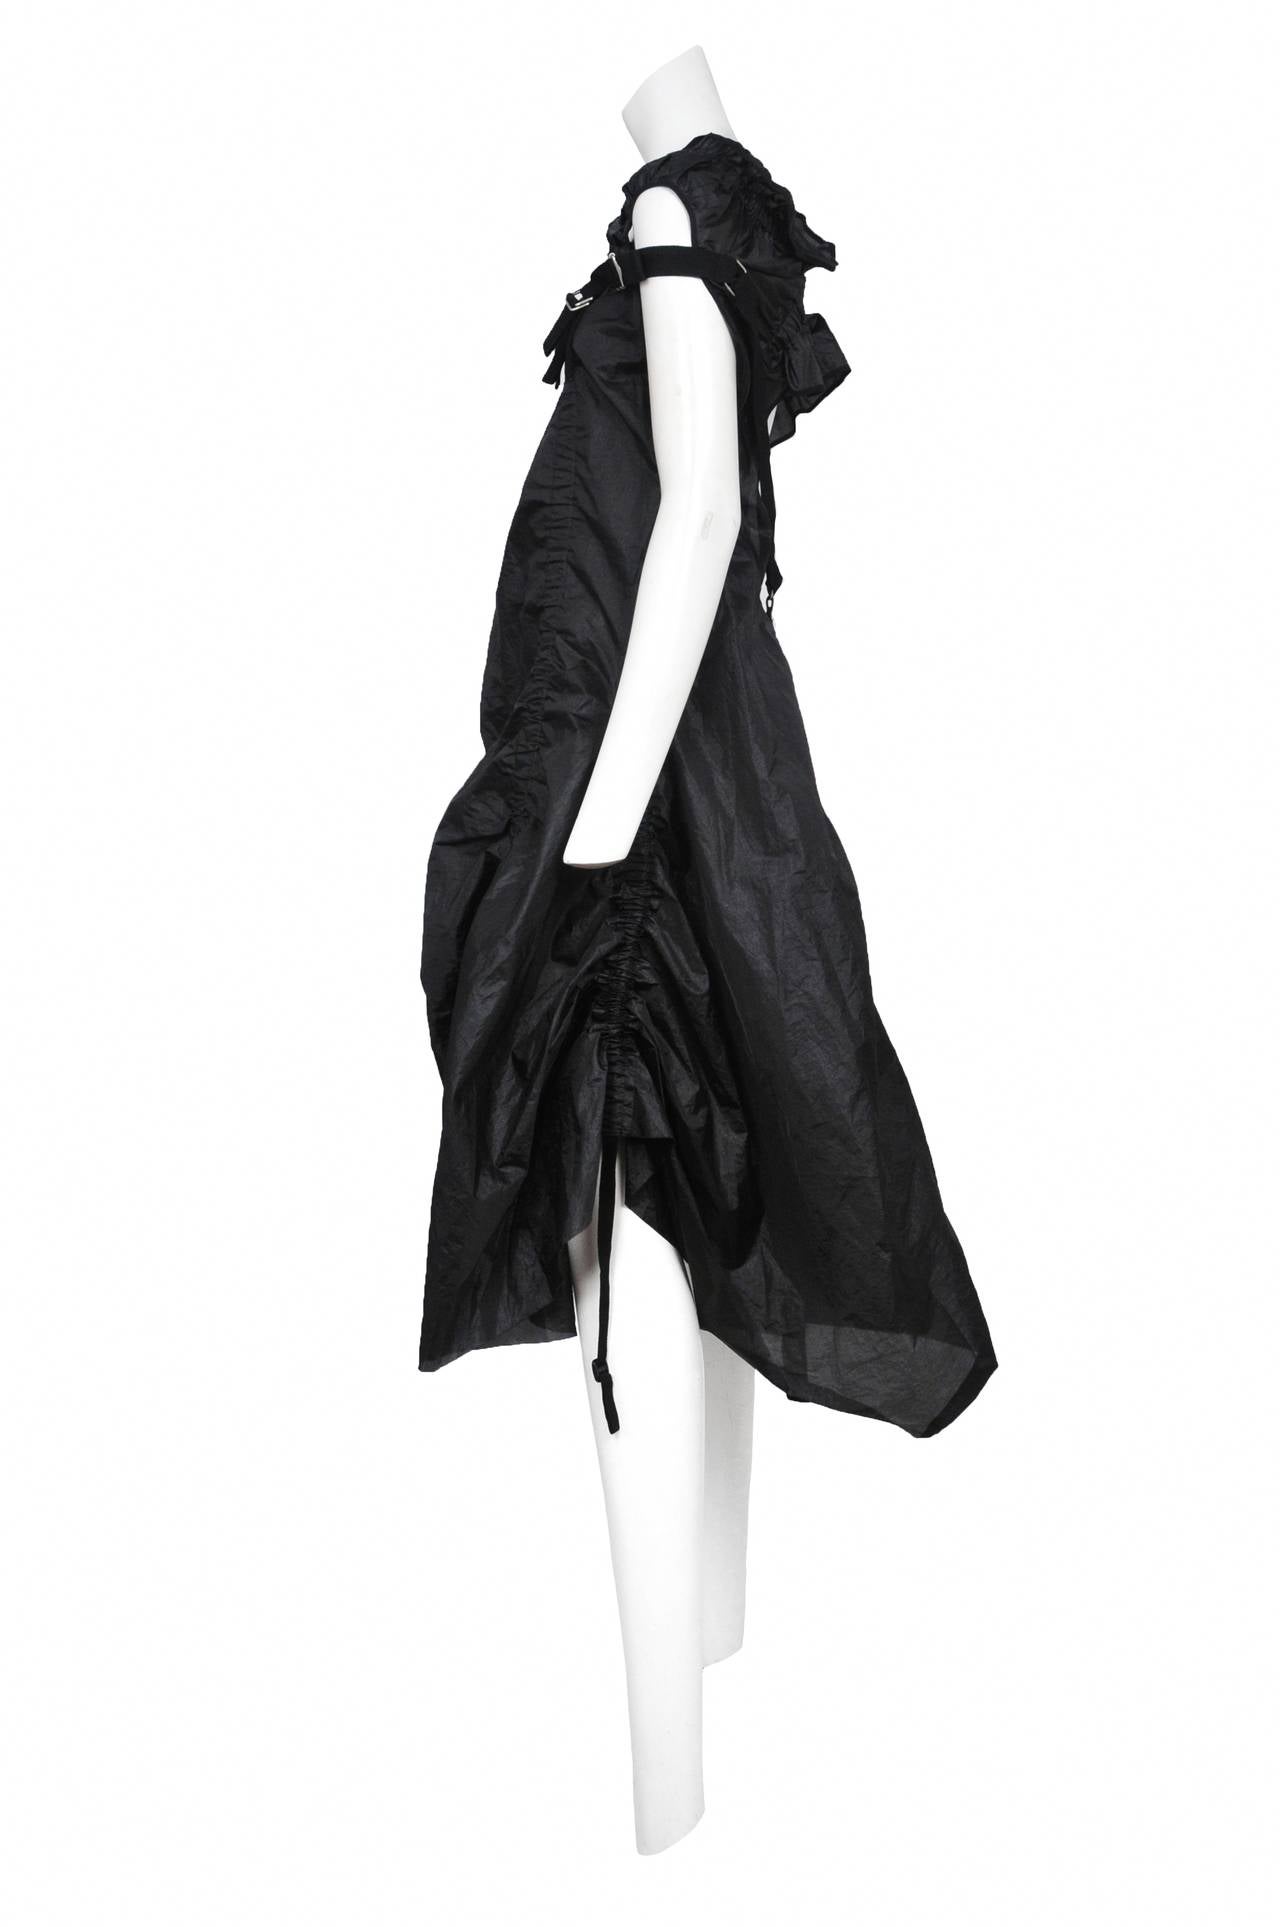 Vintage Junya Watanabe for Comme des Garcons black parachute dress with black belt and buckle detailing throughout, . Circa 2002.